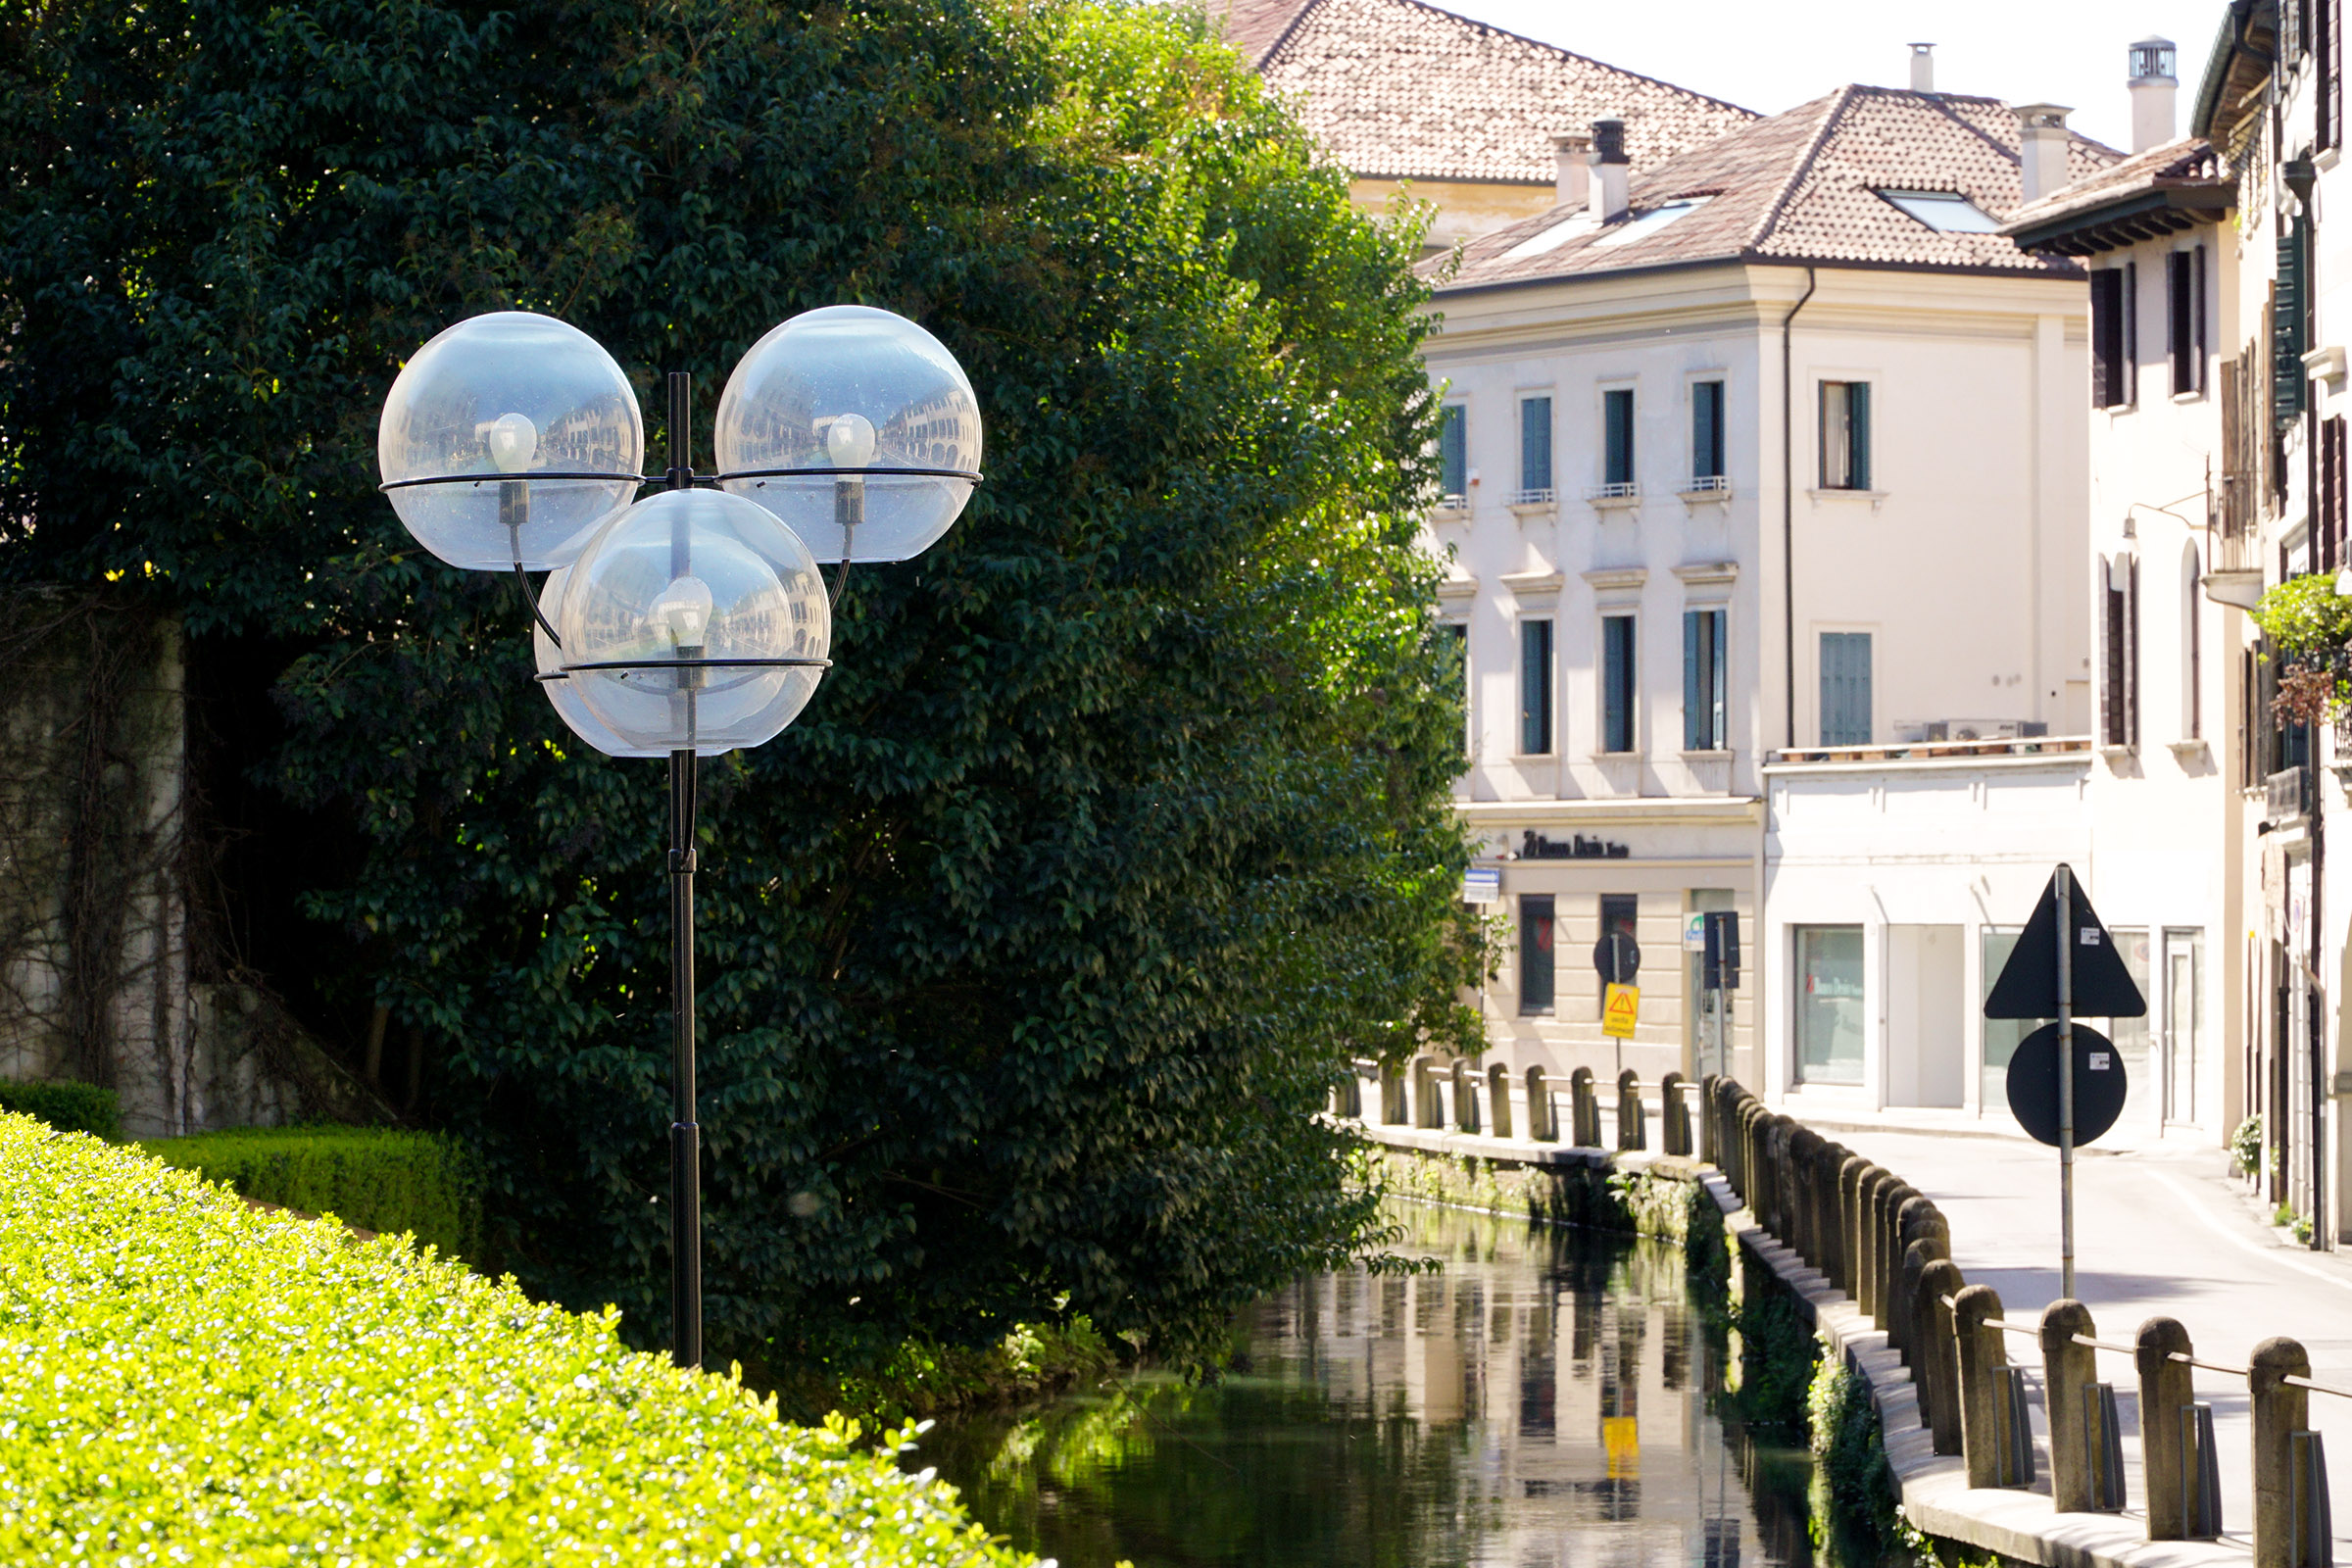 Reflections in Treviso...